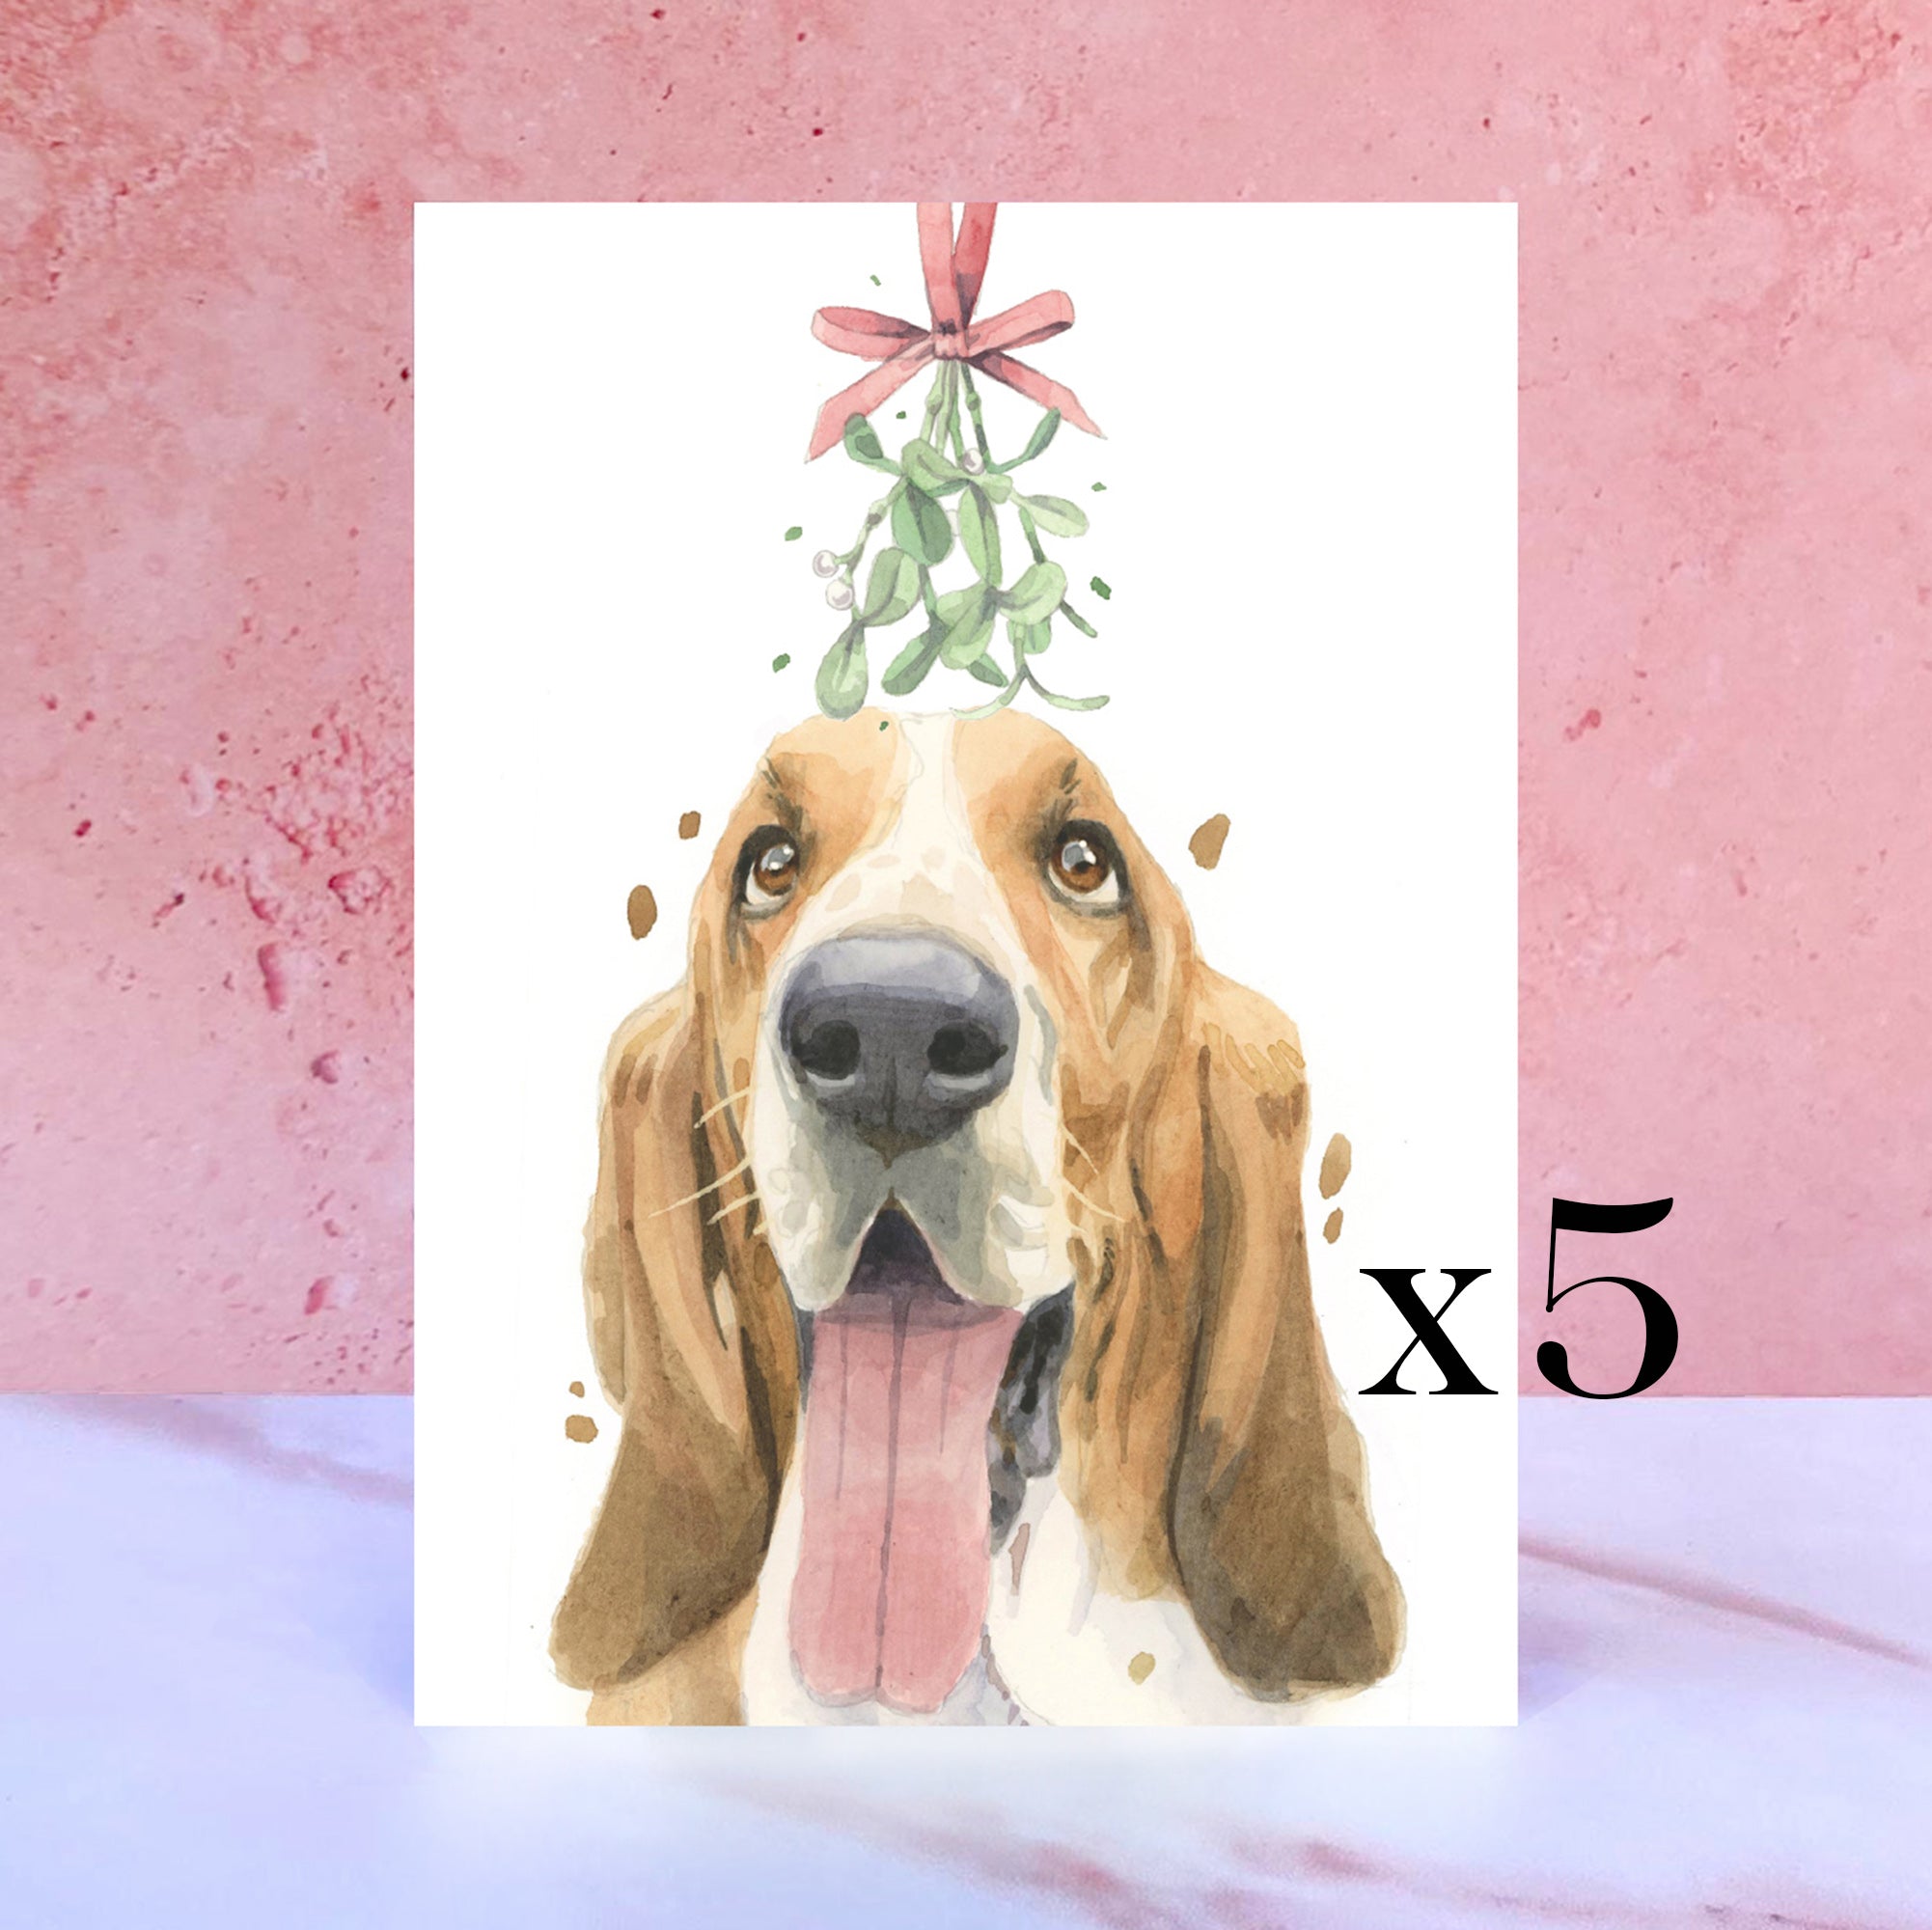 Pack of 5 Basset Hound Christmas Cards Holiday Greeting Card